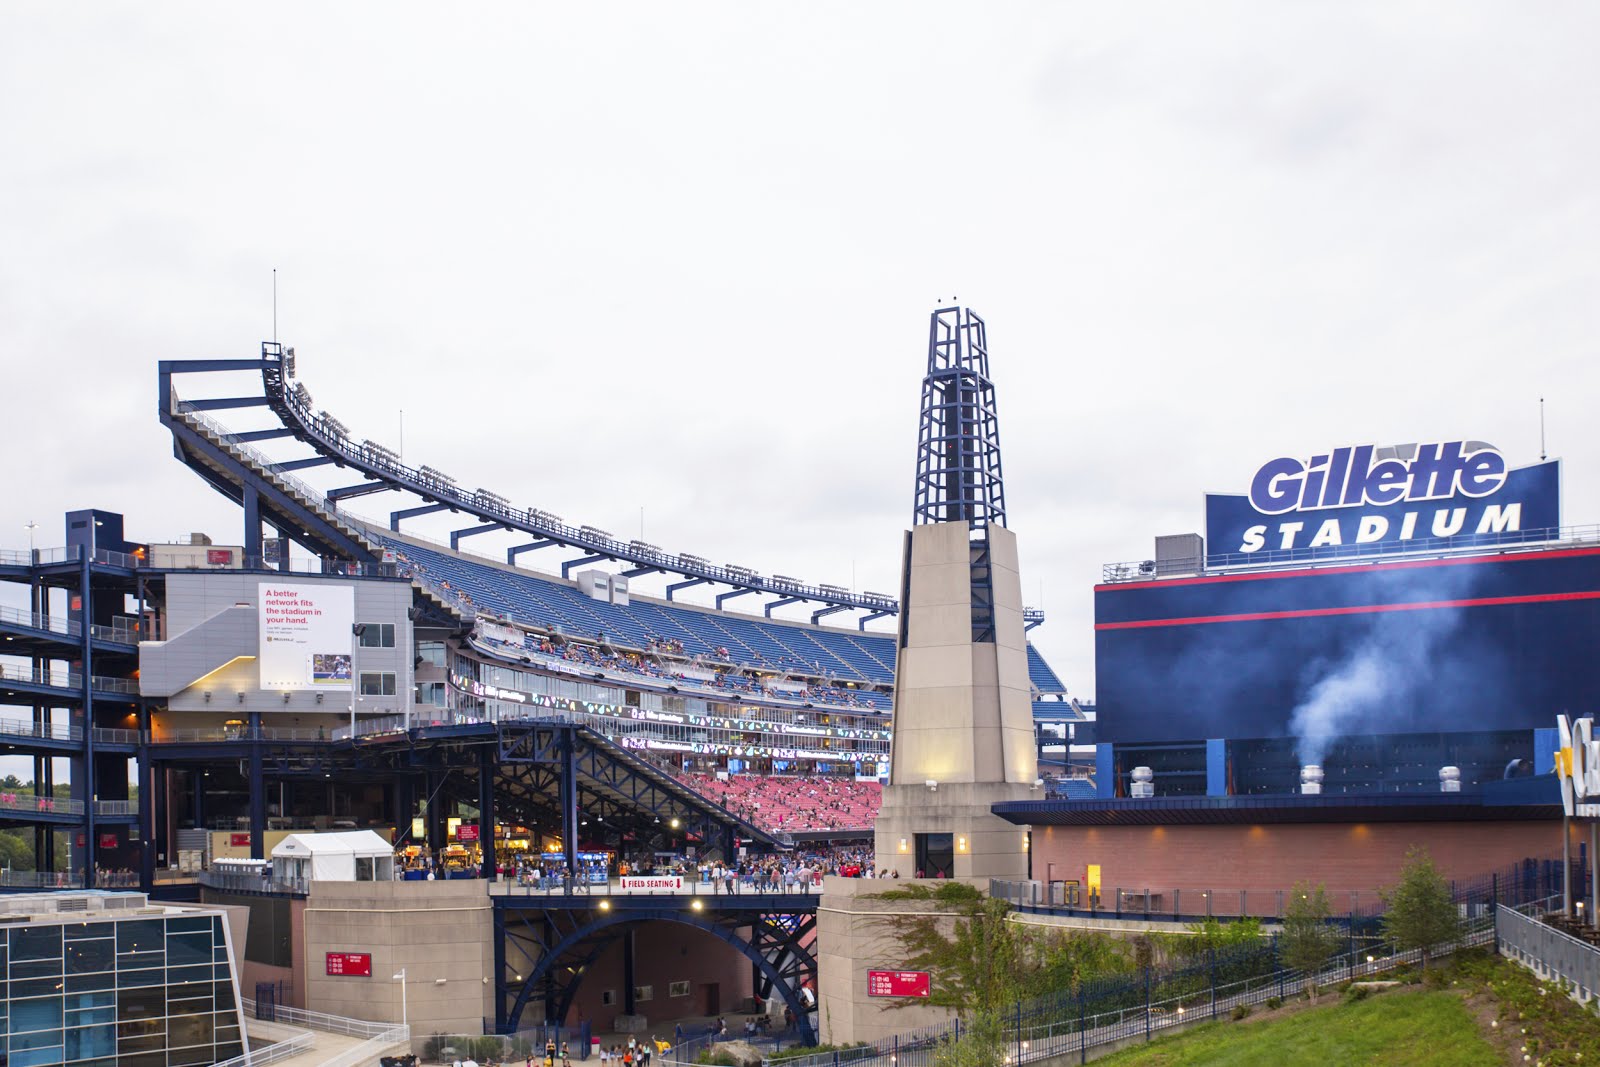 Sports Stadium Tickets: Visit Gillette Stadium to Attend a Game or Concert